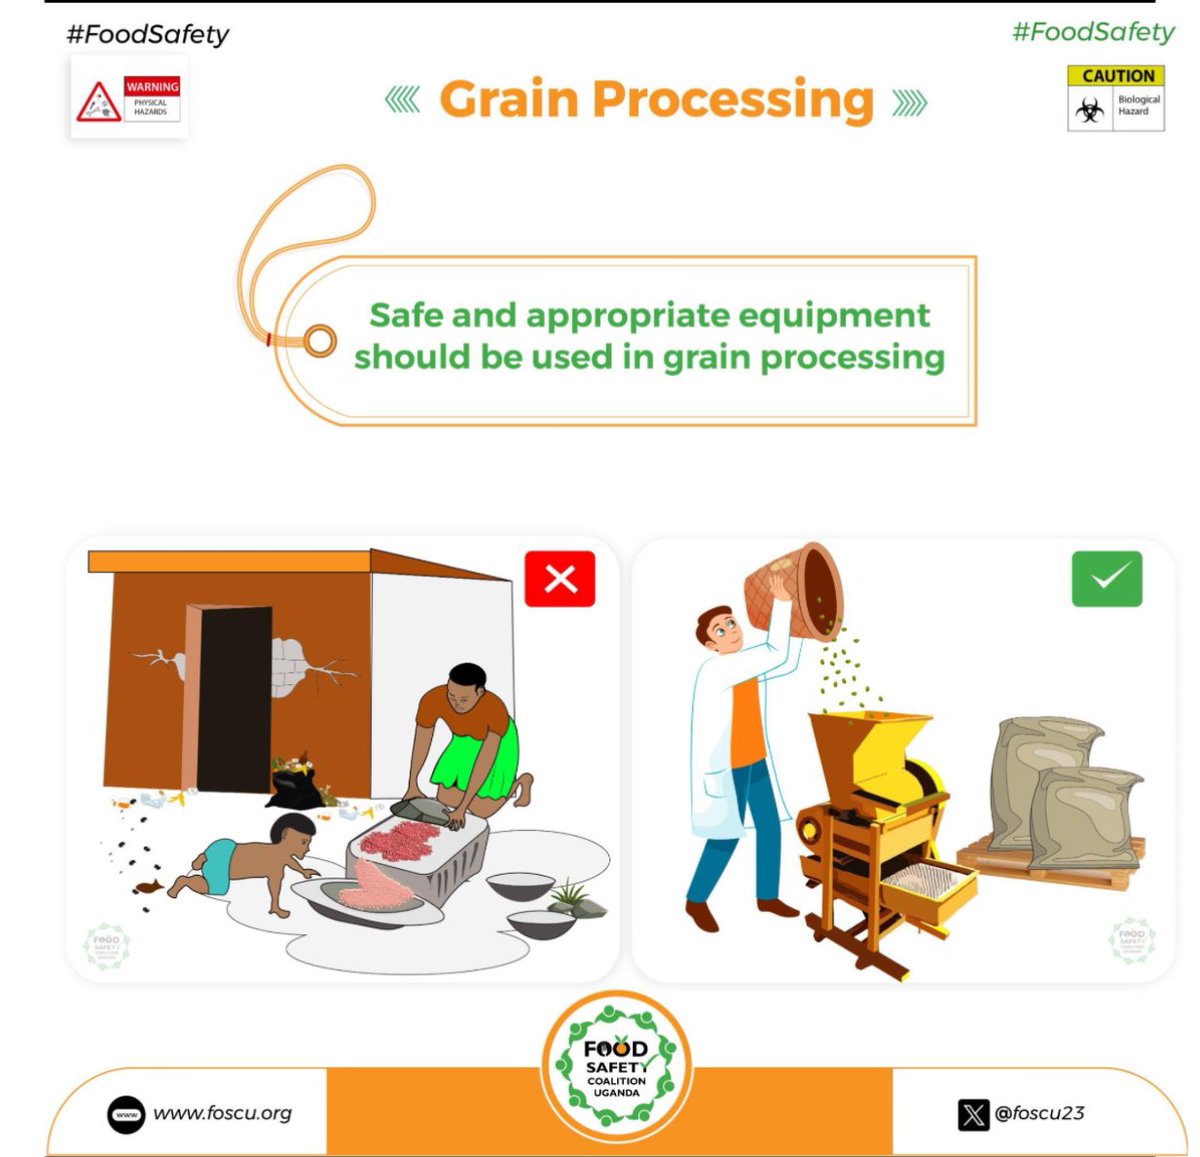 FOOD SAFETY ALERT!! Use of old poor-quality equipment to process agricultural produce may result in contamination of flour with broken metal or plastic pieces. Be vigilant!!! #FoodSafey | @foscu23 | foscu.org